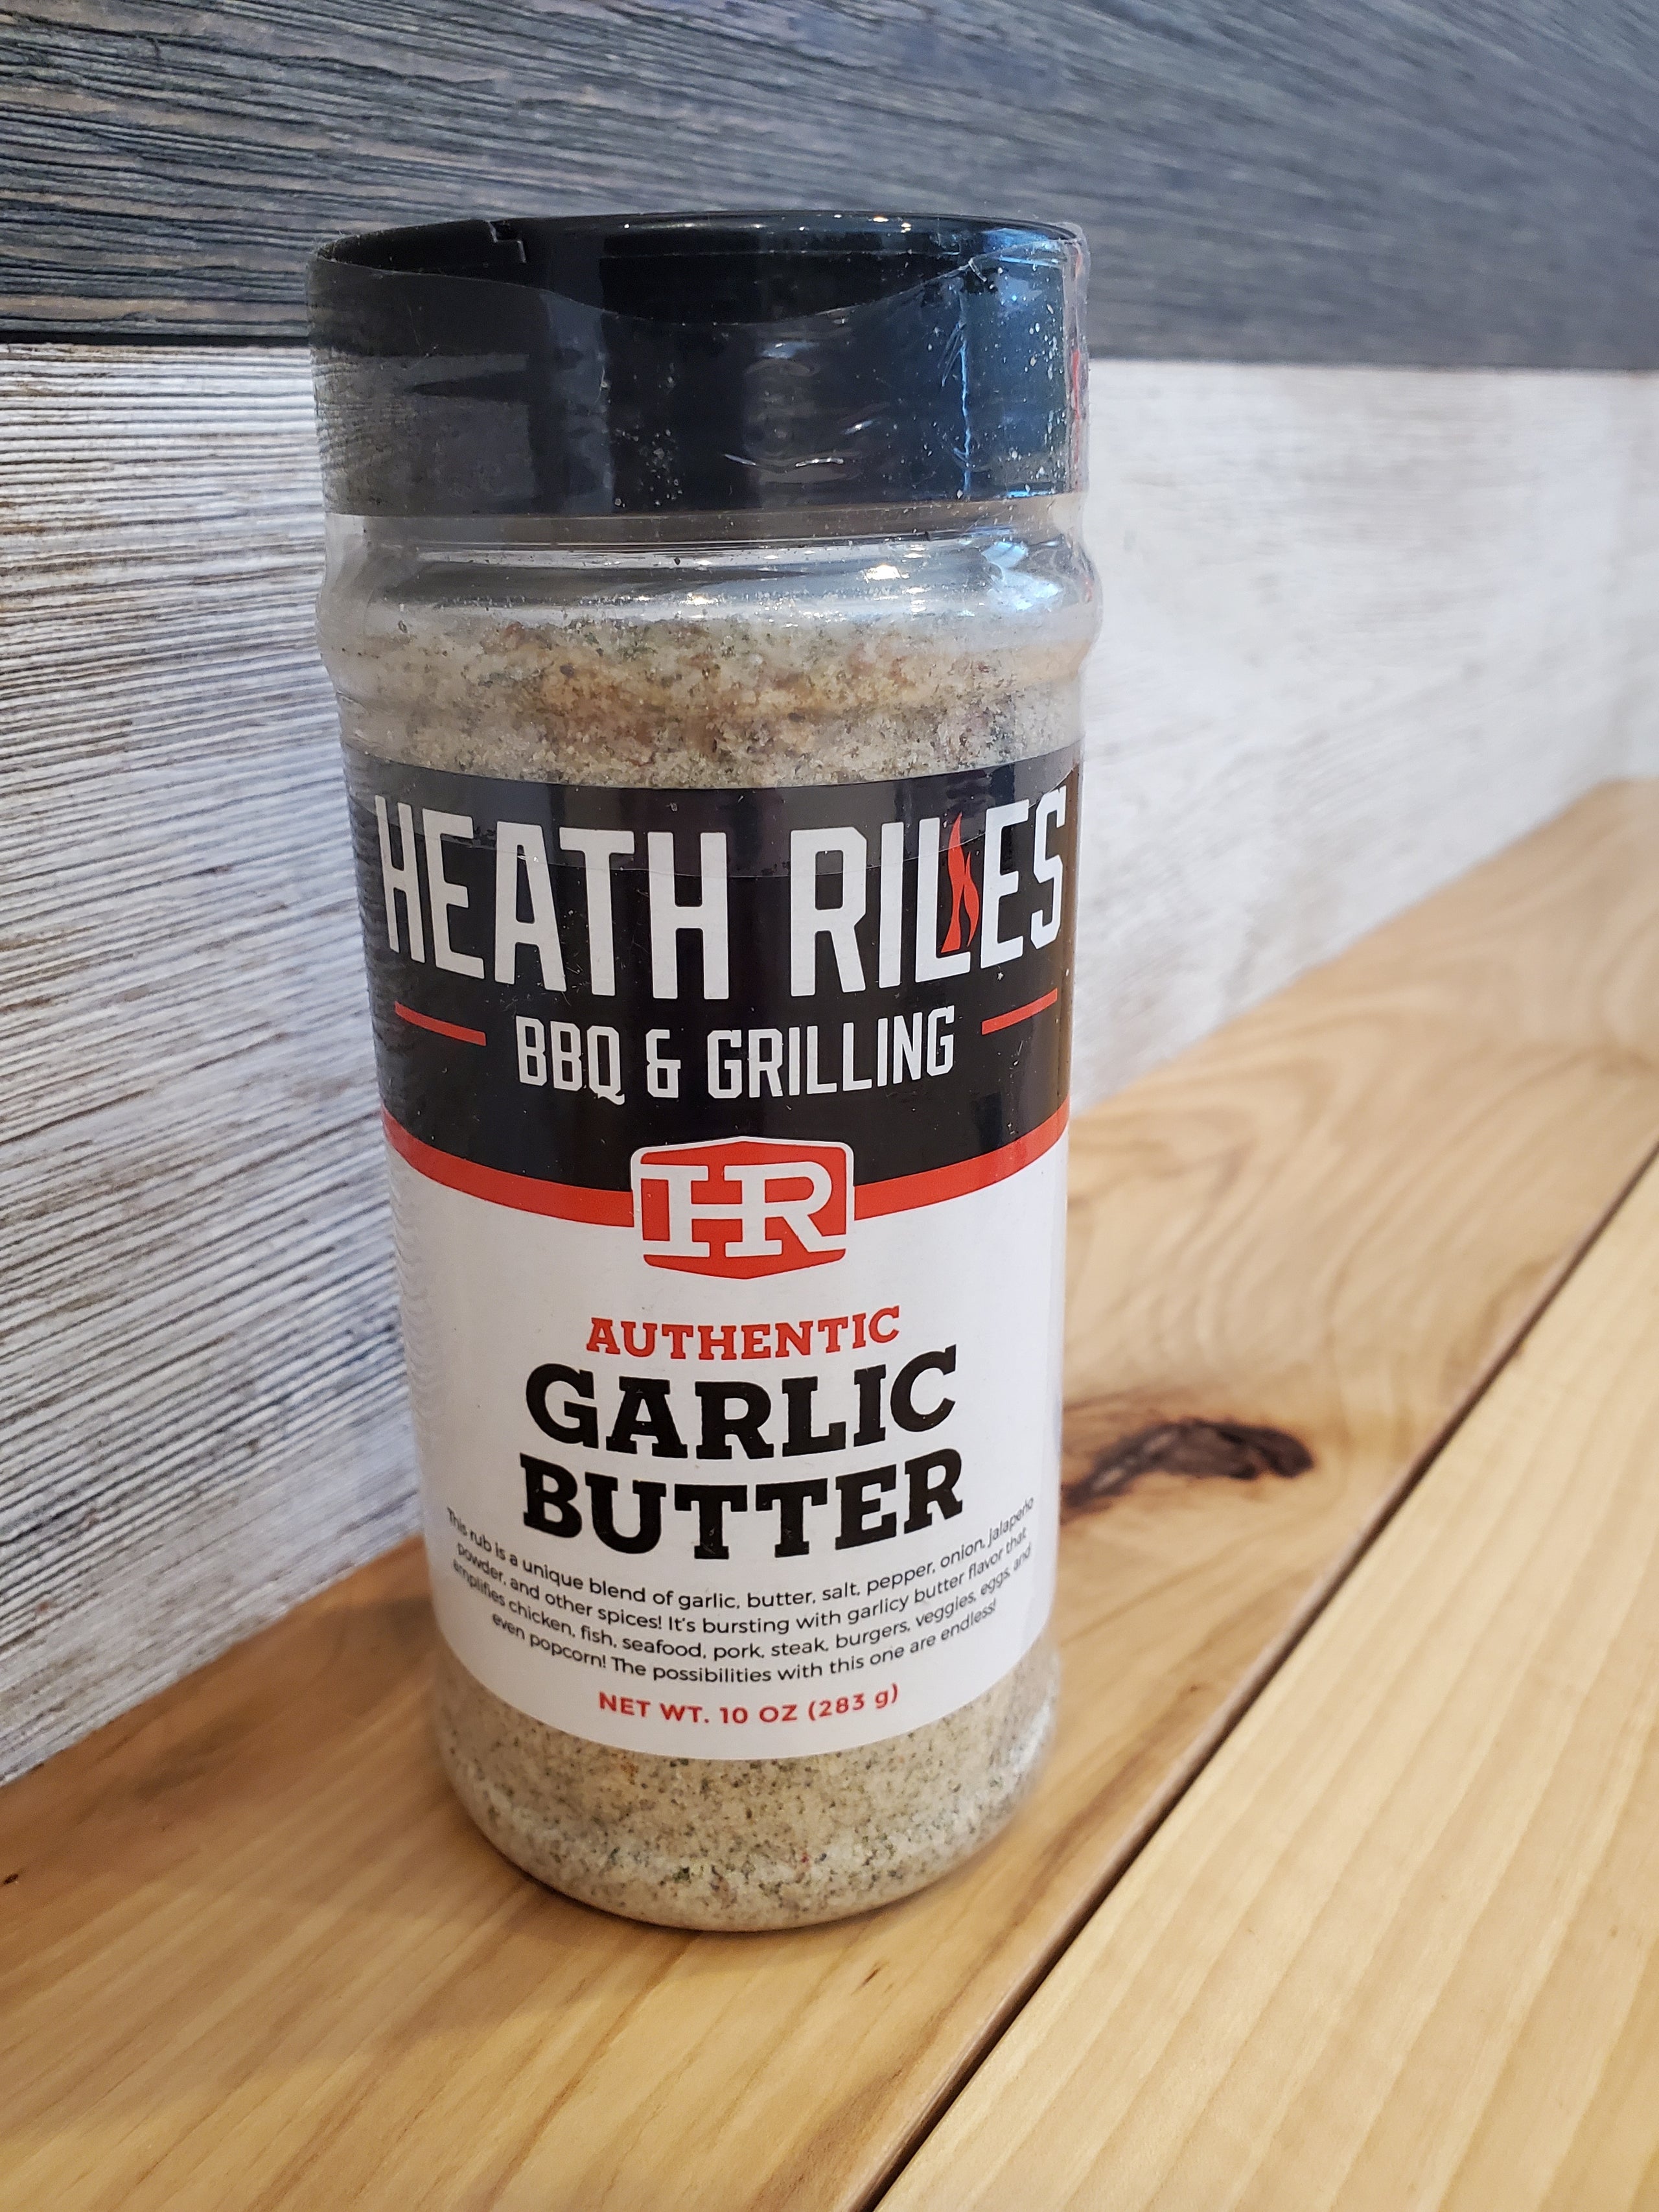 Heath Riles BBQ - Get one or all of our rubs and sauces